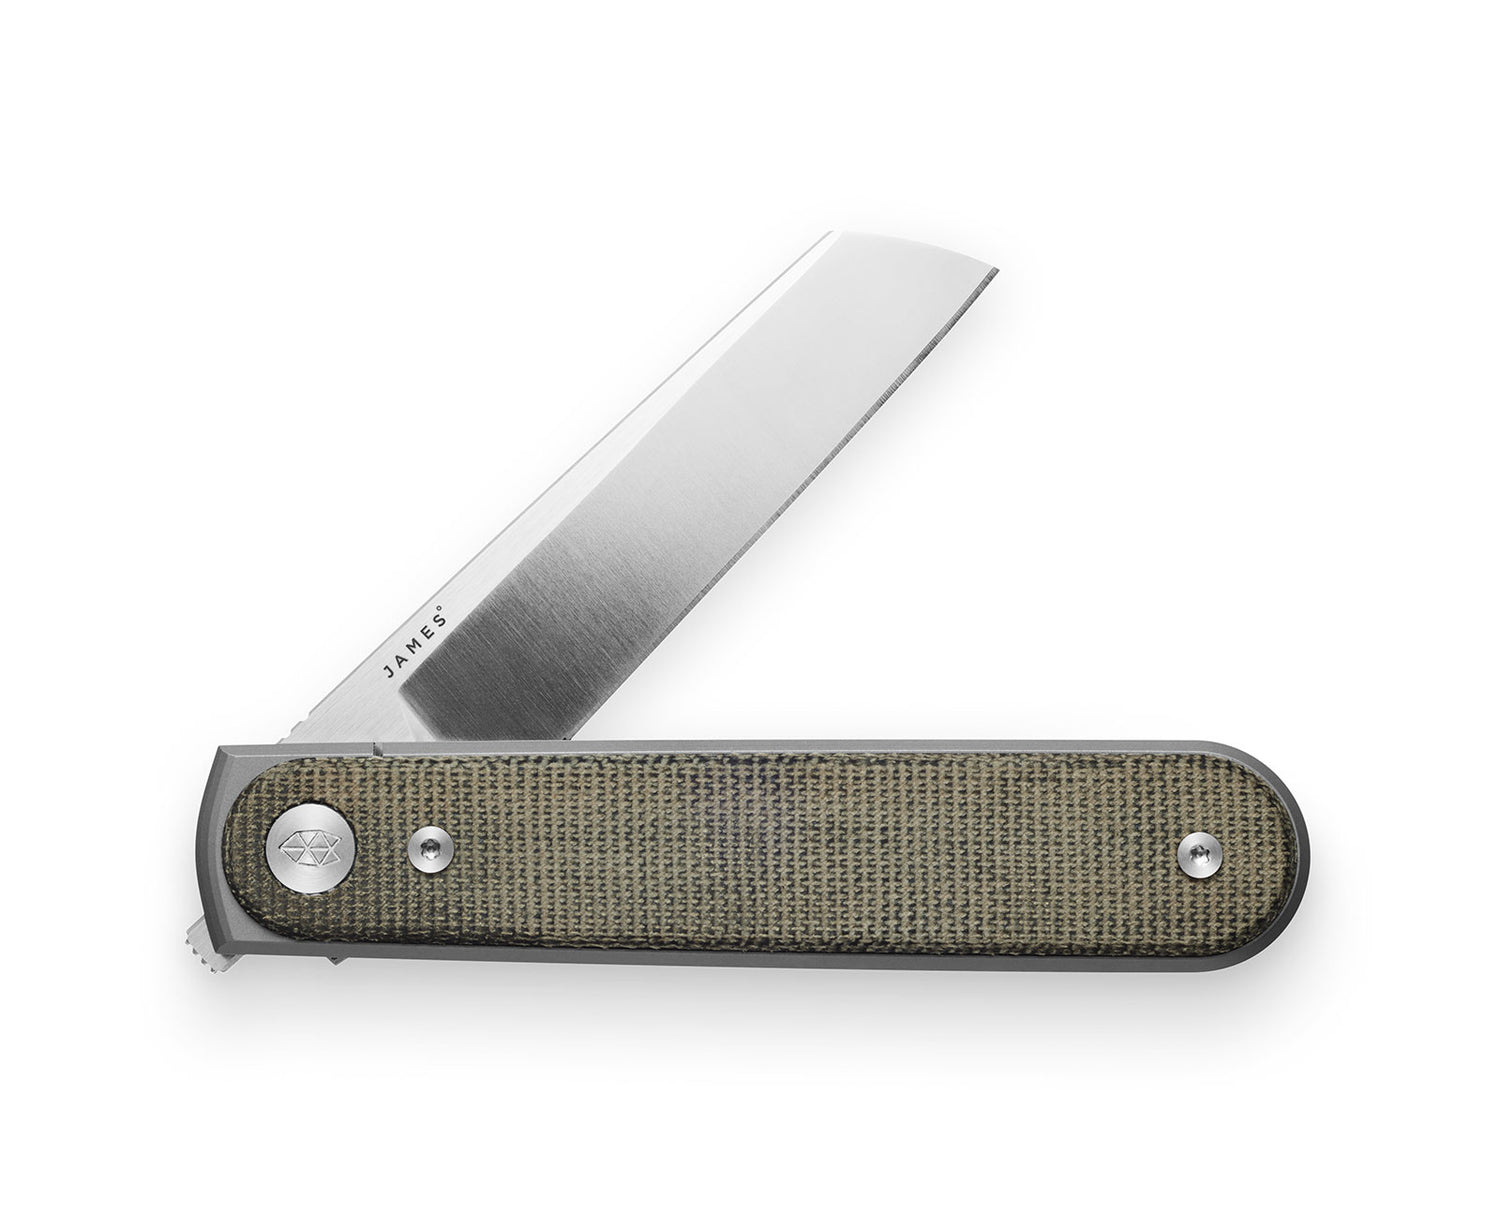 The Duval knife with green micarta handle and stainless steel blade.